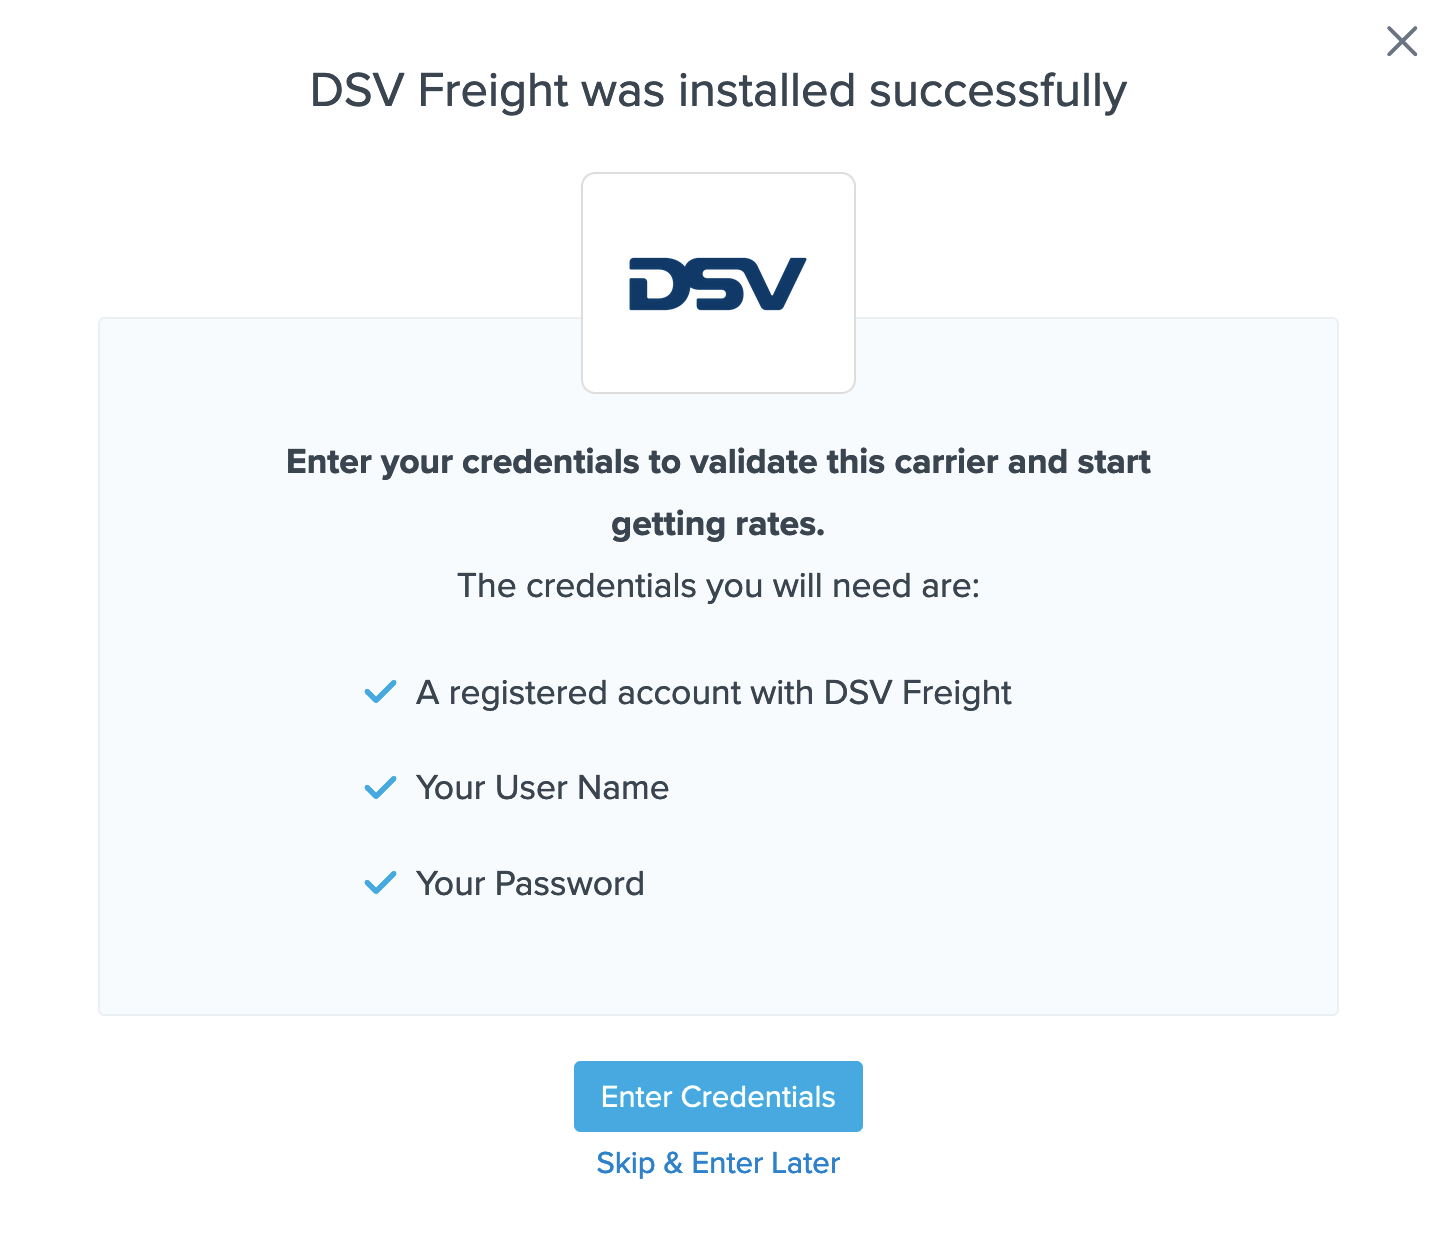 DSV Freight installed successfully